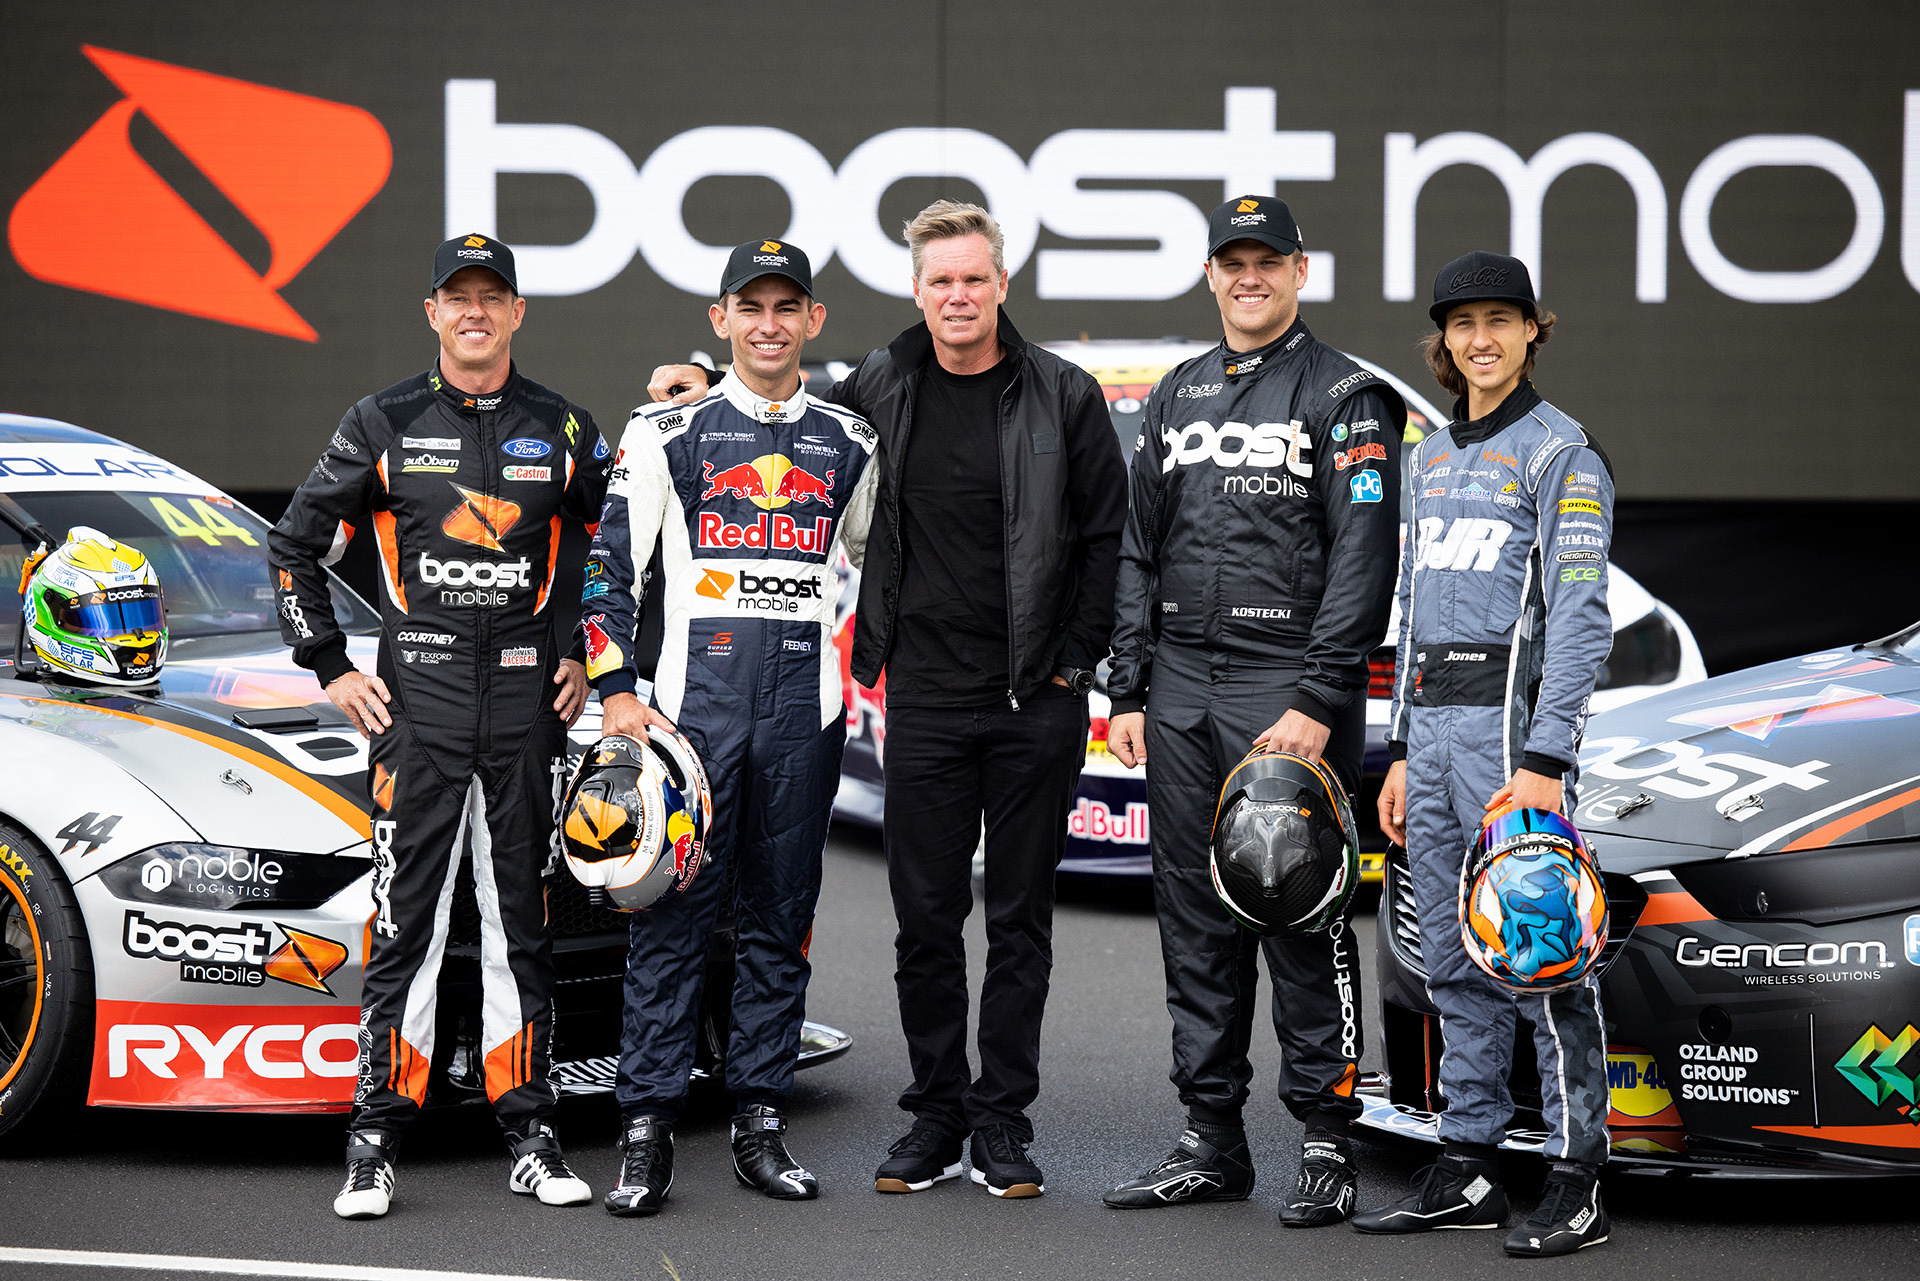 Boost Mobile founder Peter Adderton (middle) with James Courtney (from left), Broc Feeney, Brodie Kostecki, and Macauley Jones.